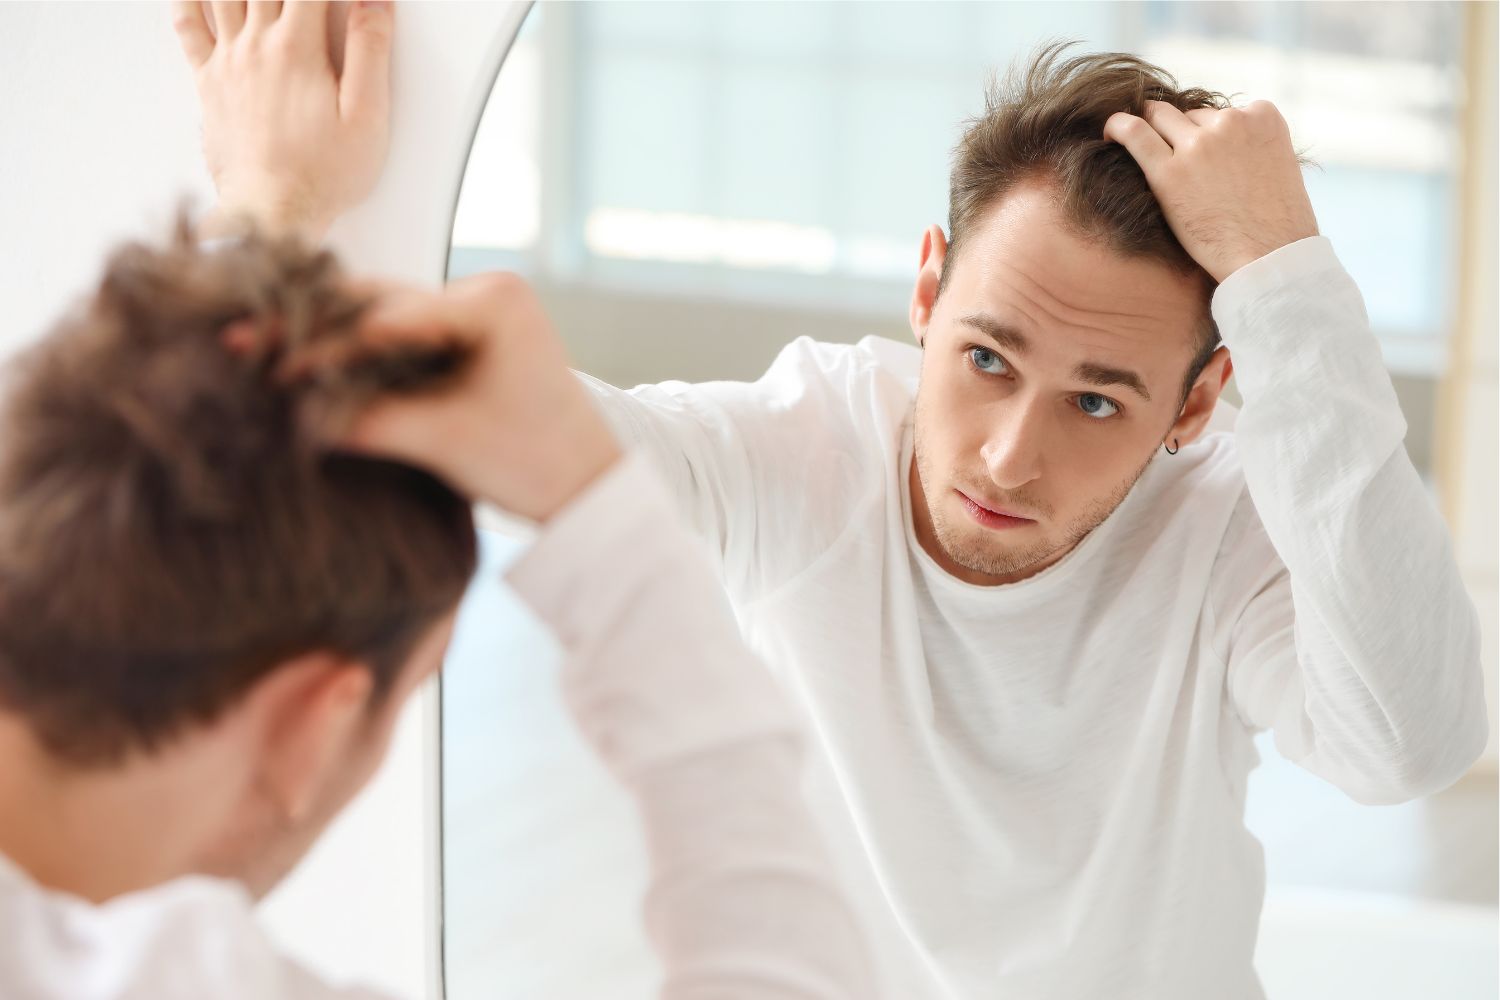 Top Tips for a Successful ARTAS Hair Transplant Recovery